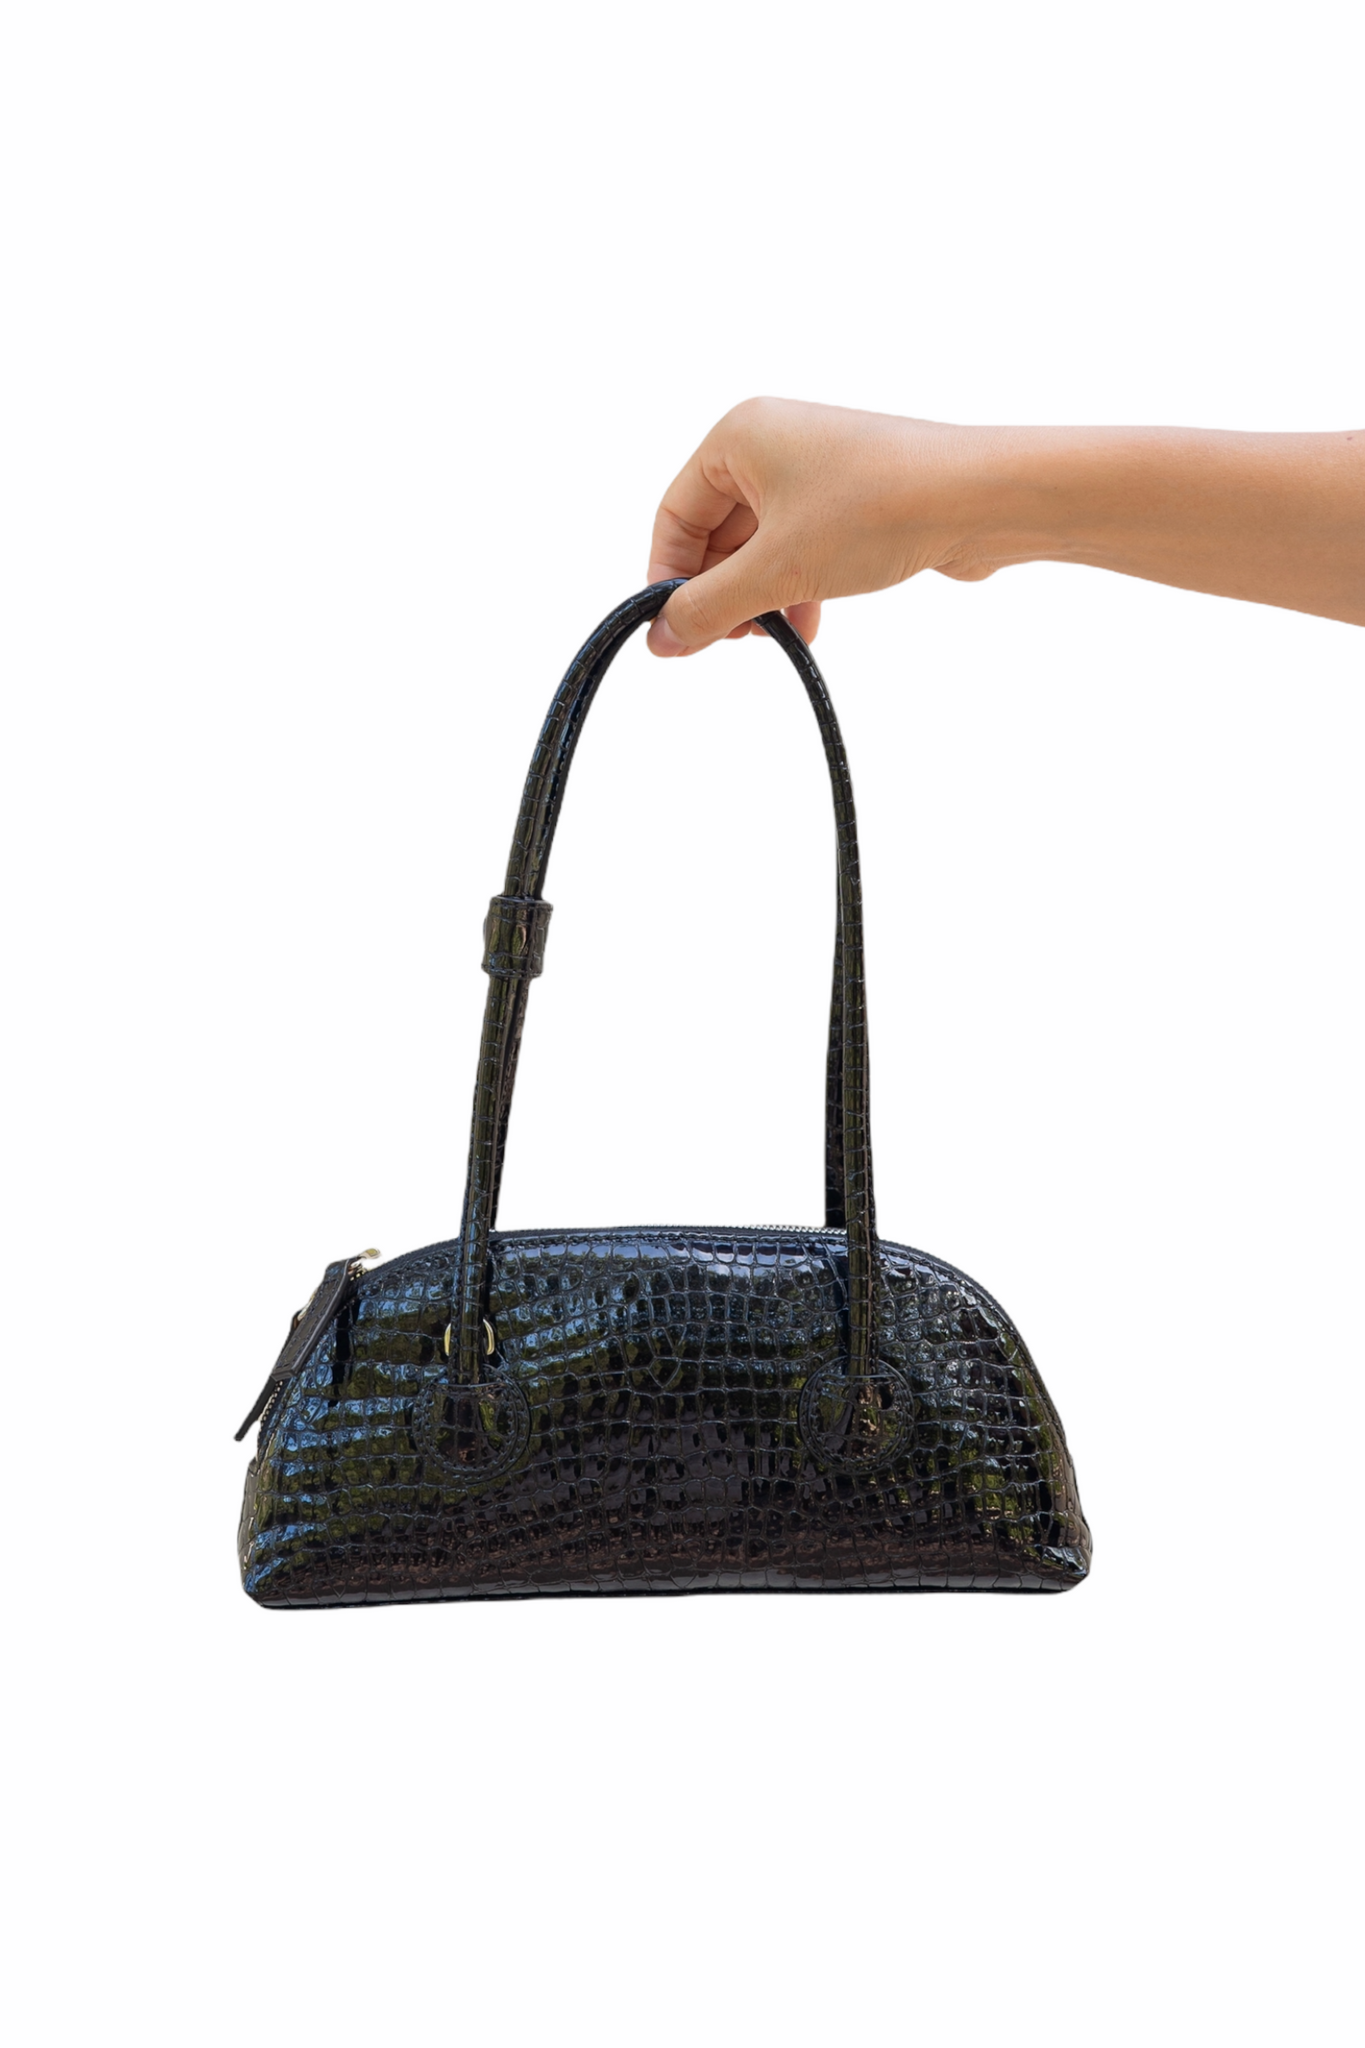 BESSETTE BAG W/ CROSS STRAP IN BLACK SHINY CROCO BY MARGESHERWOOD